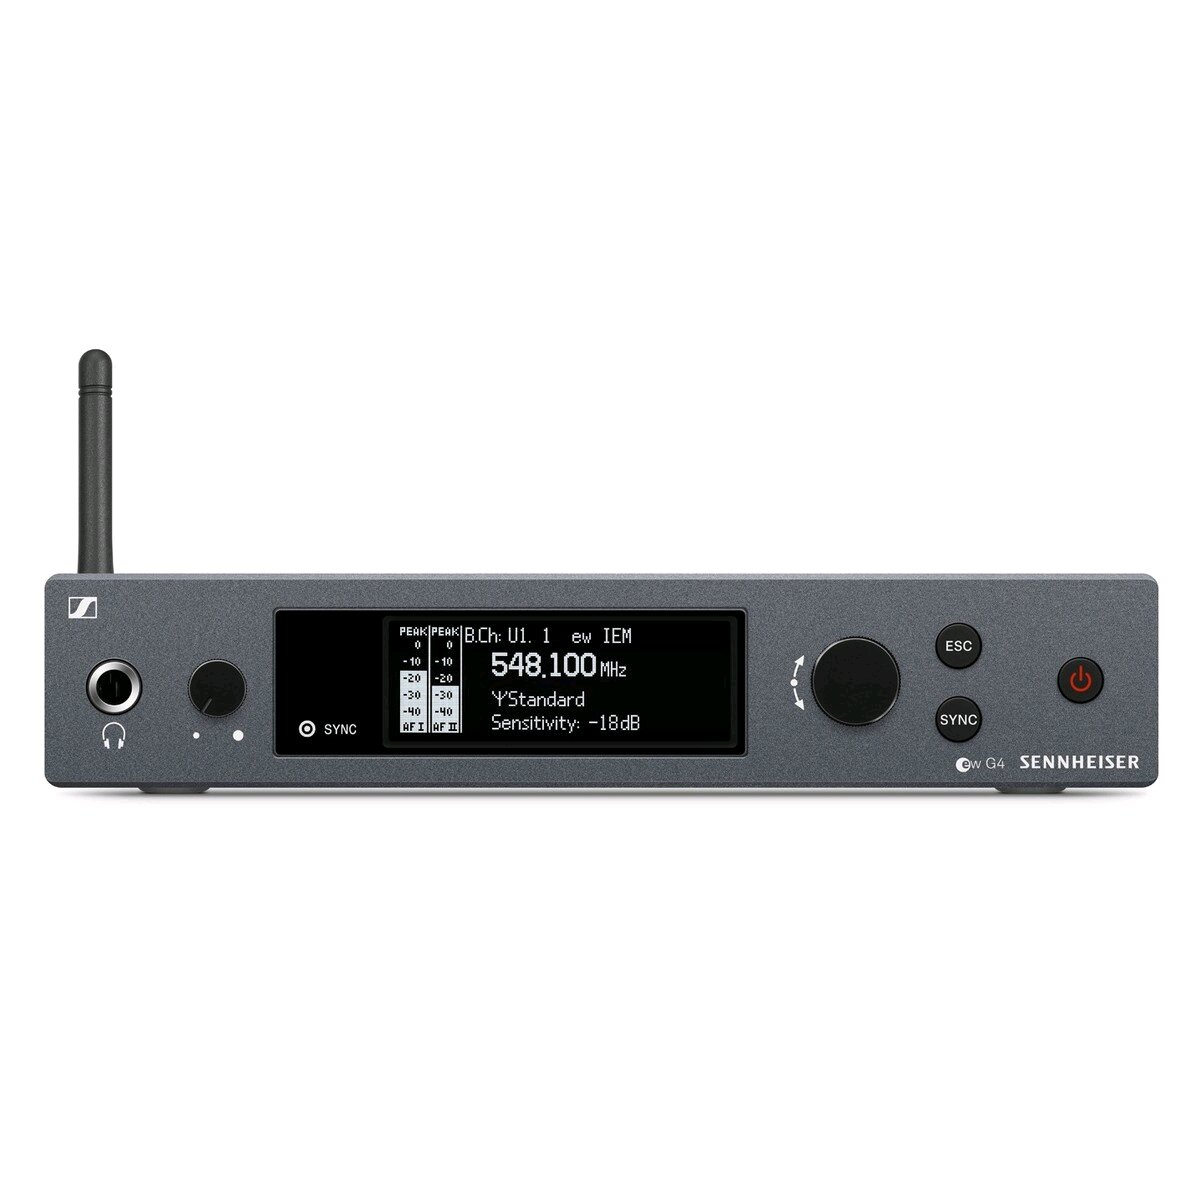 Sennheiser SR IEM G4-A stereo transmitter for stage monitor A (516 - 558 MHz) : photo 1